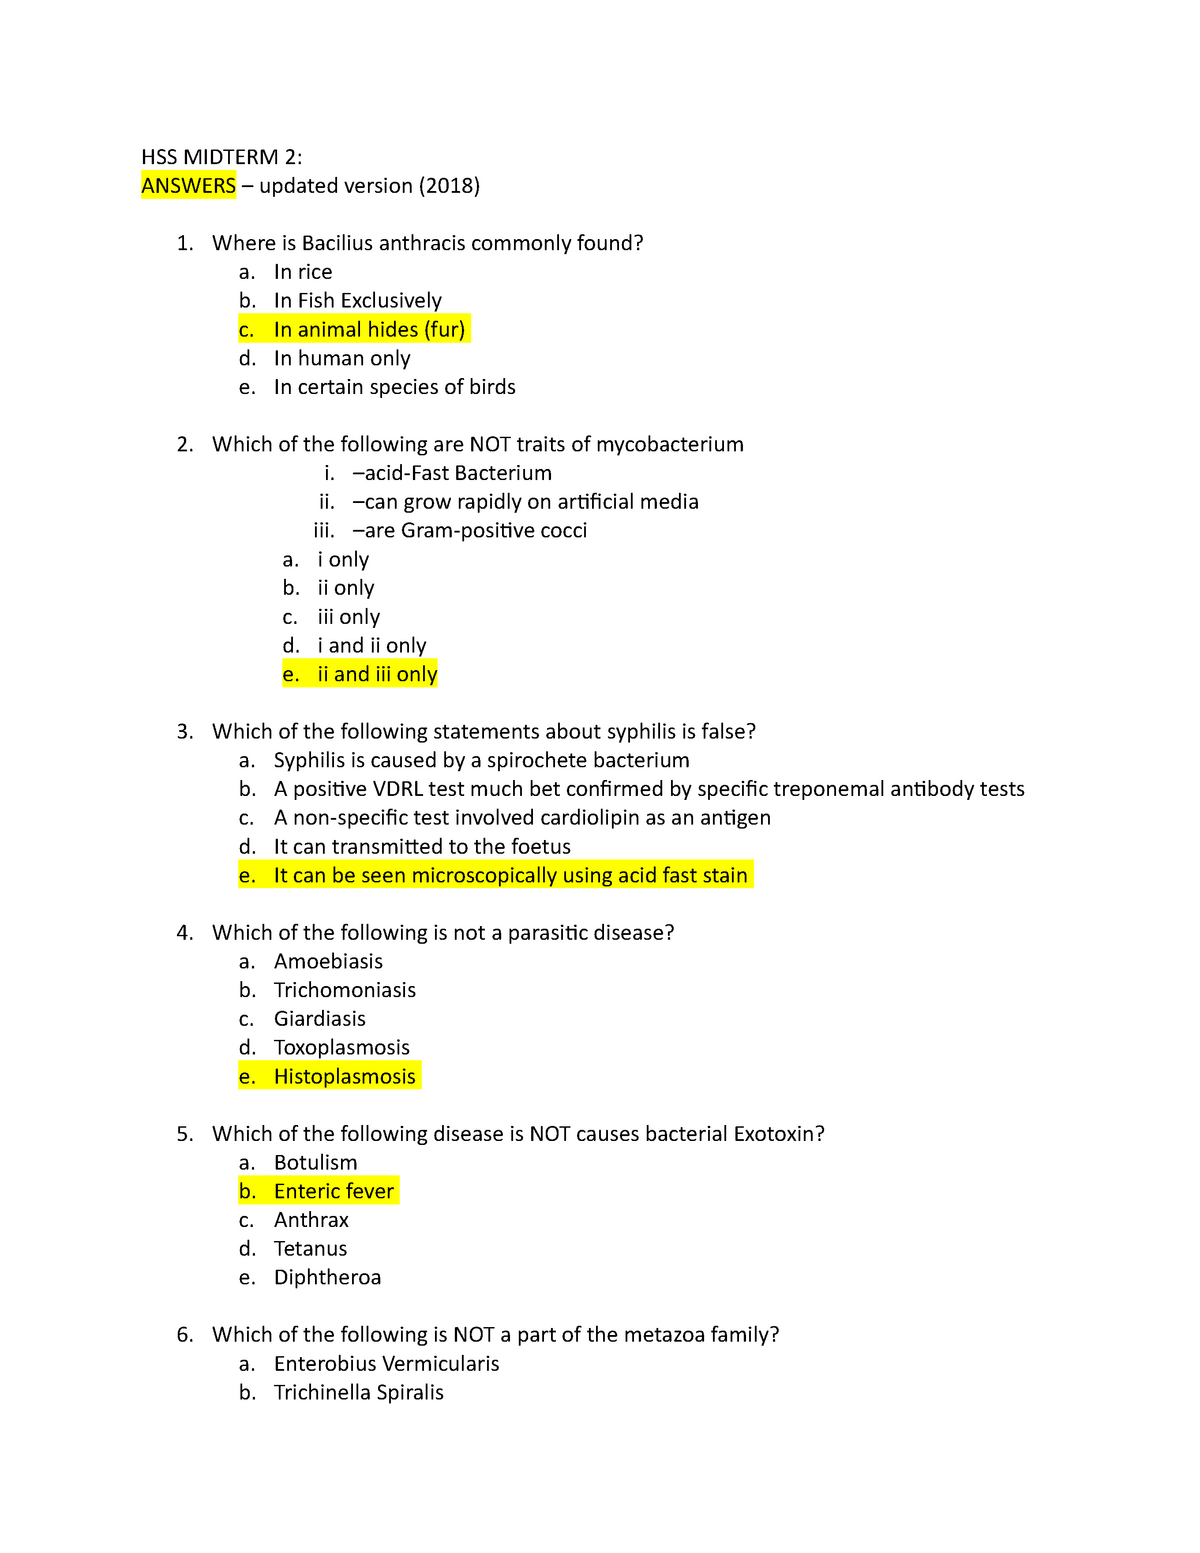 Midterm 2, questions and answers HSS MIDTERM 2 ANSWERS updated